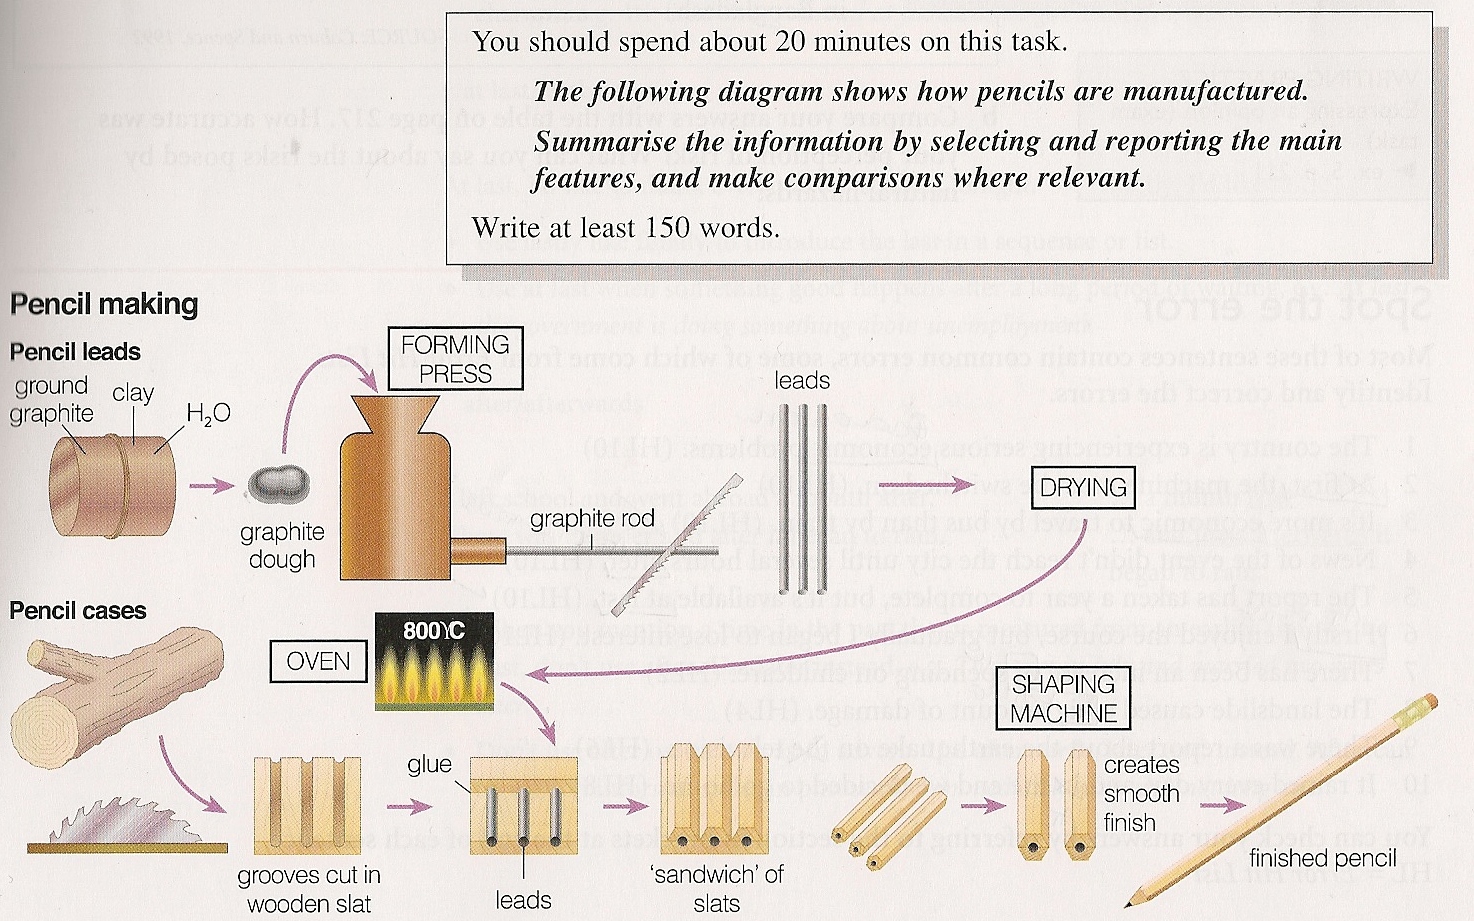 Make 1 2 comparisons where relevant. Process of Pencil Production. Process writing task 1. Pencil making process. How to write task 1 process.